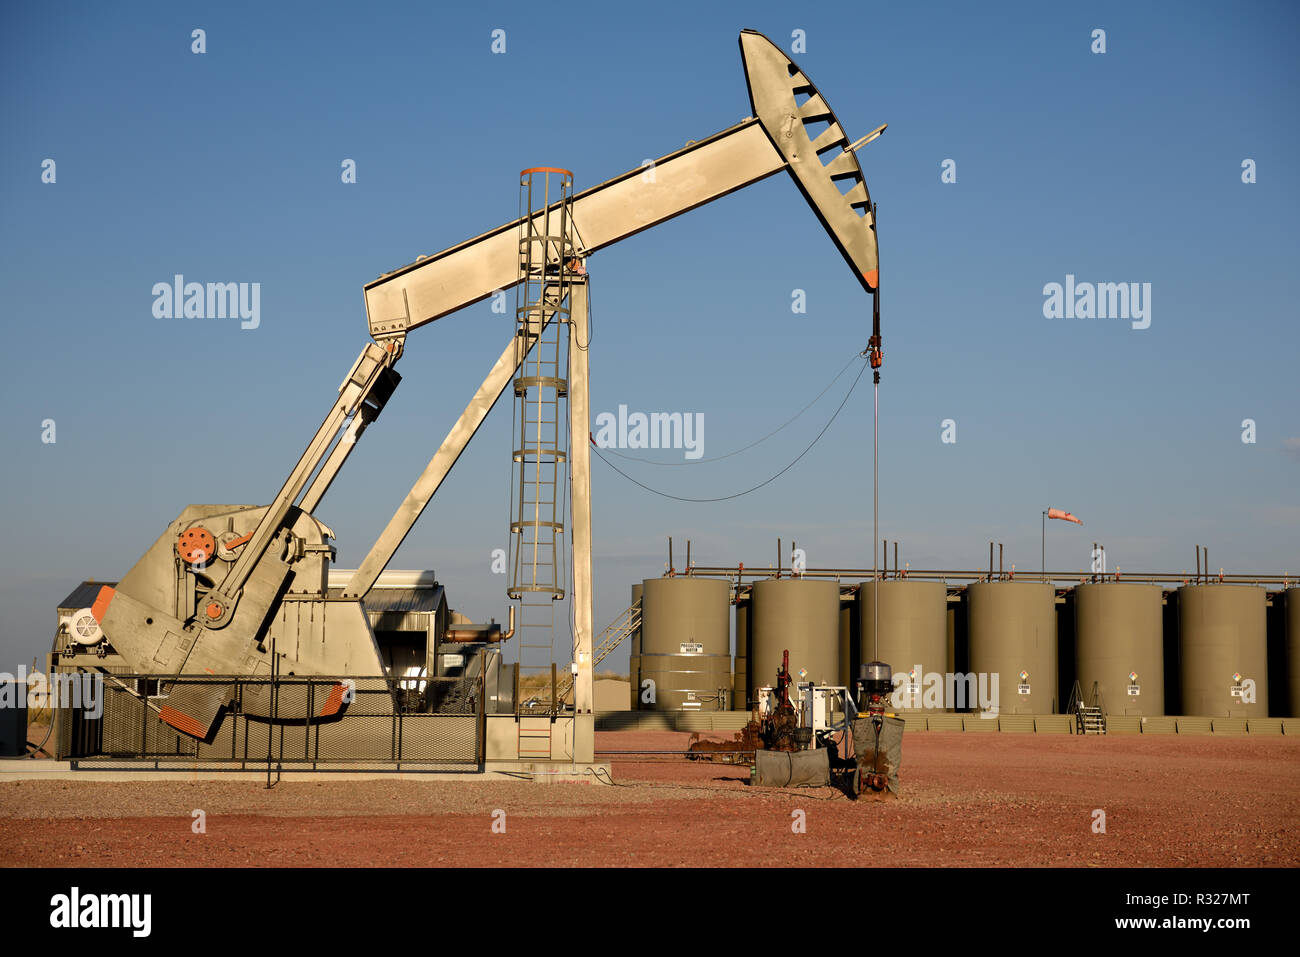 Crude oil pump jack and production storage tanks in the Powder River Basin. Stock Photo